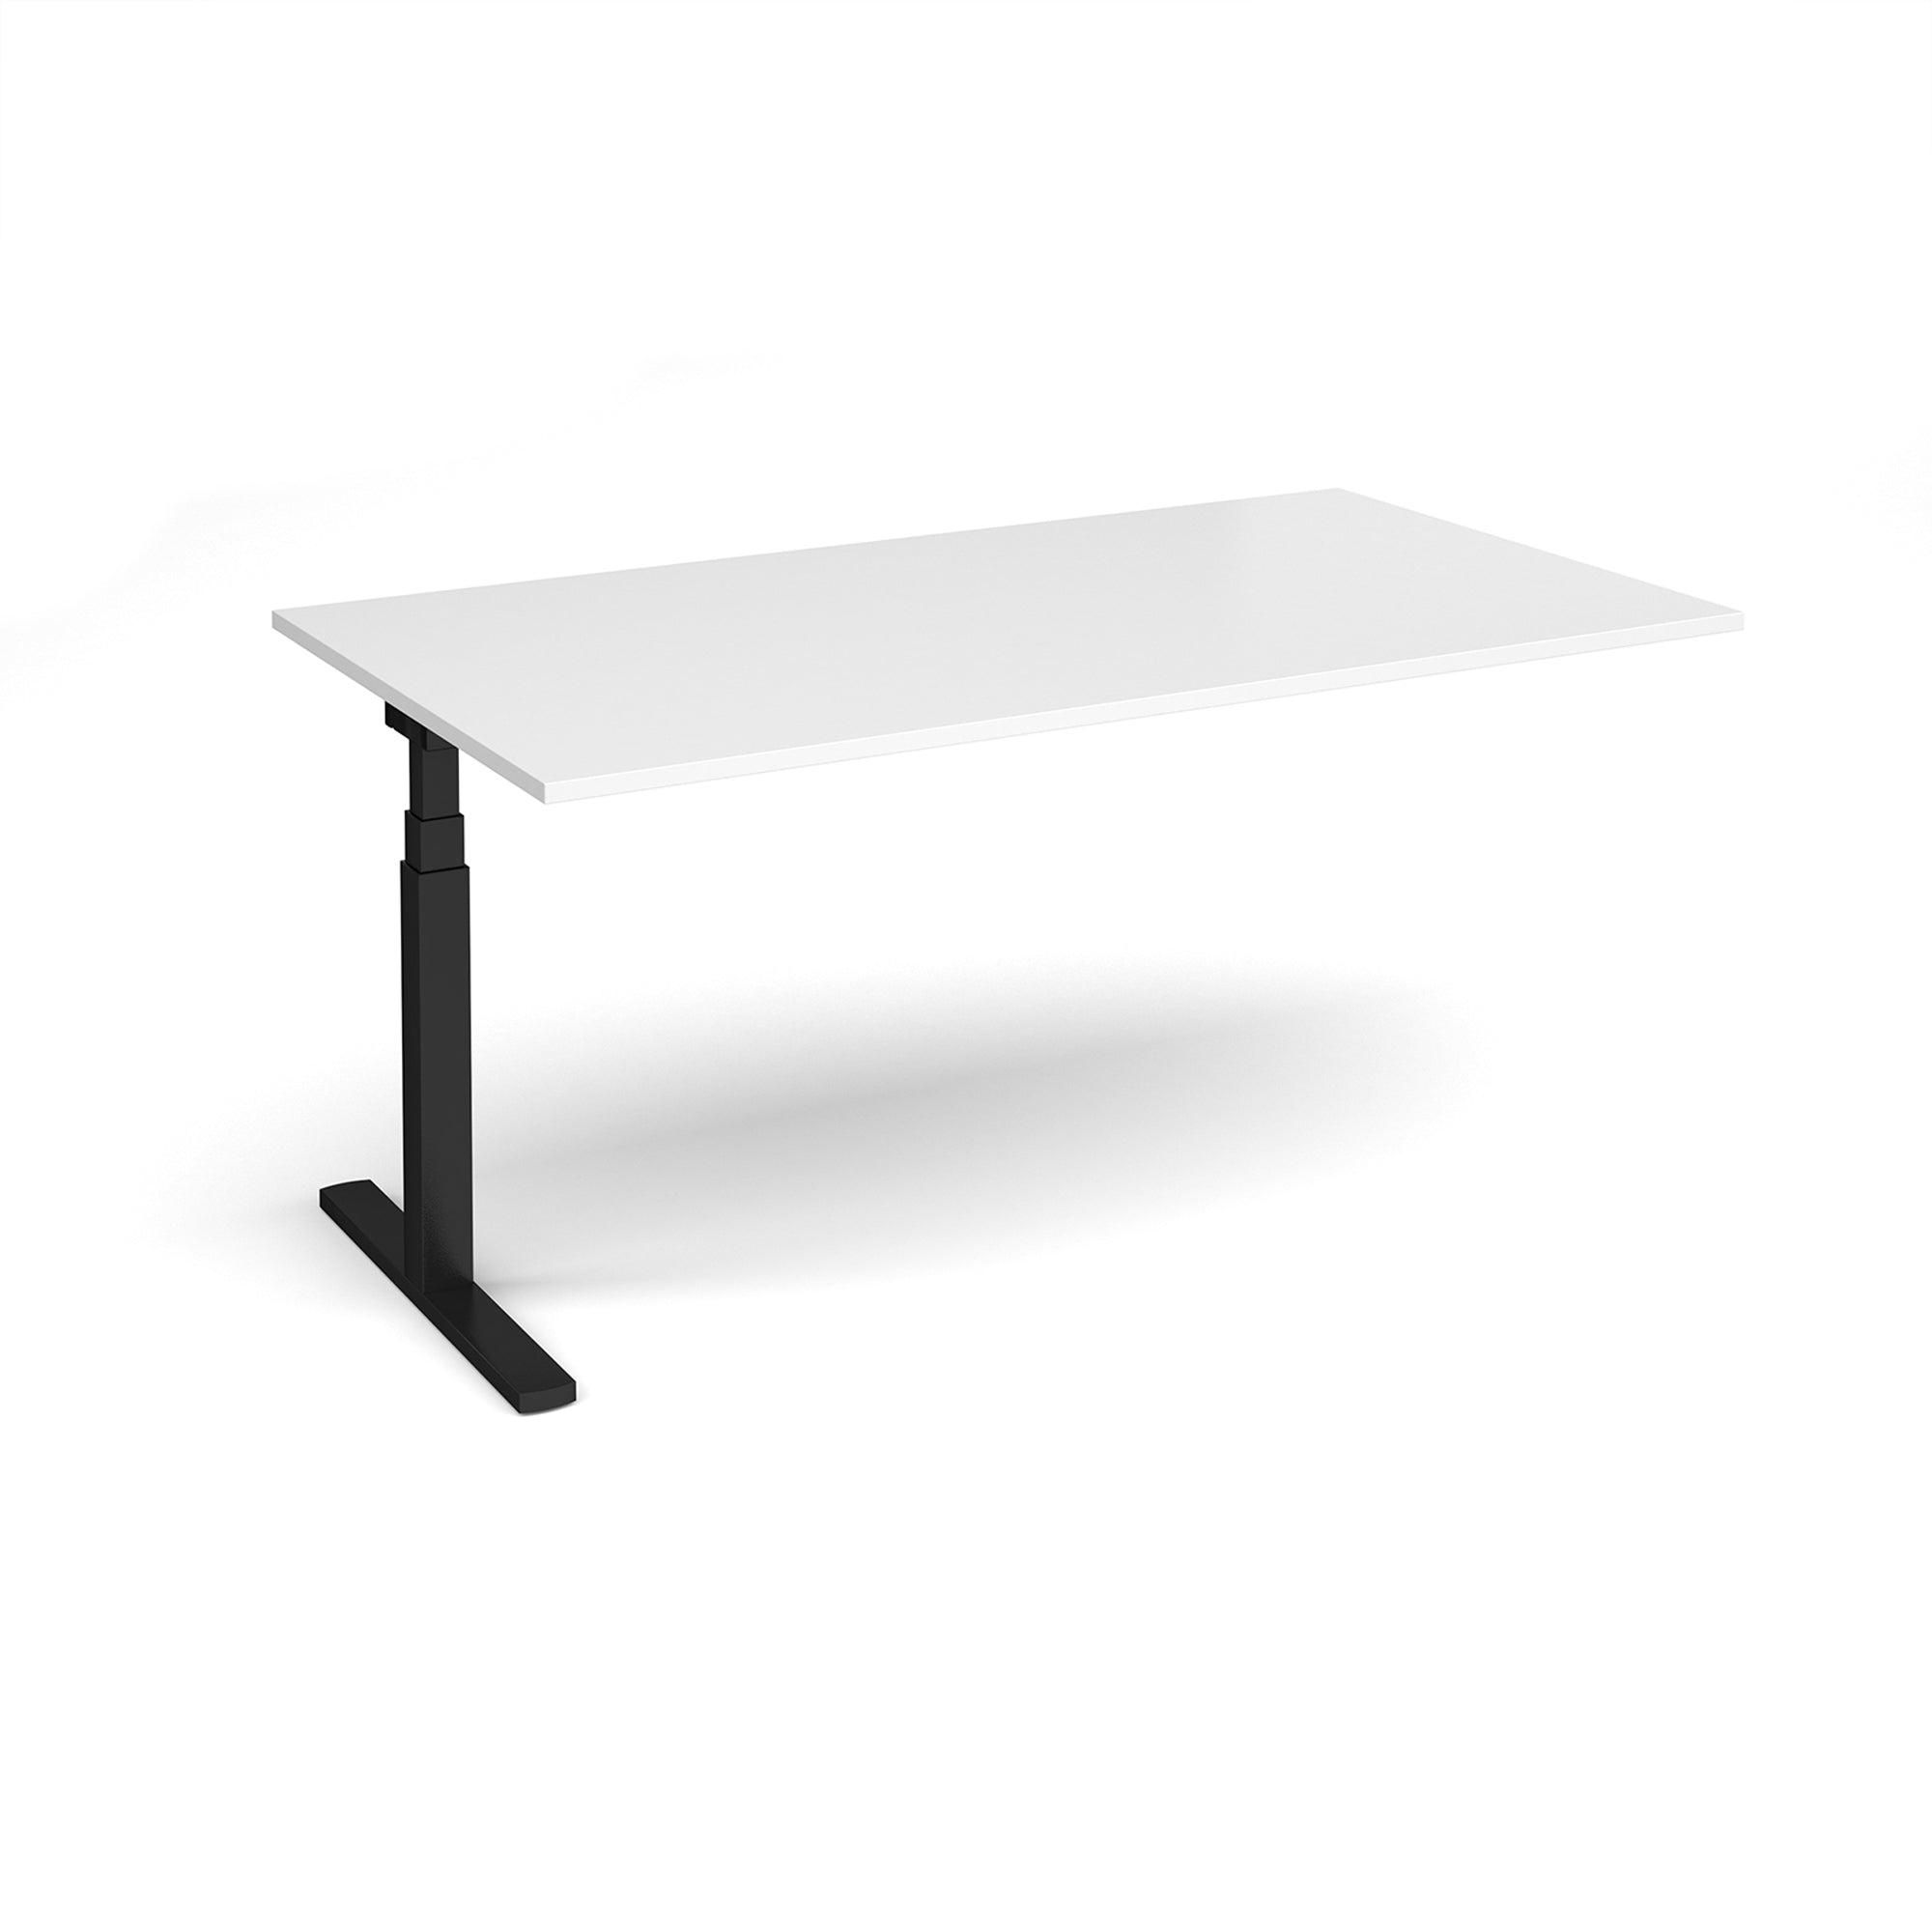 Elev8 Touch boardroom table add on unit - Office Products Online